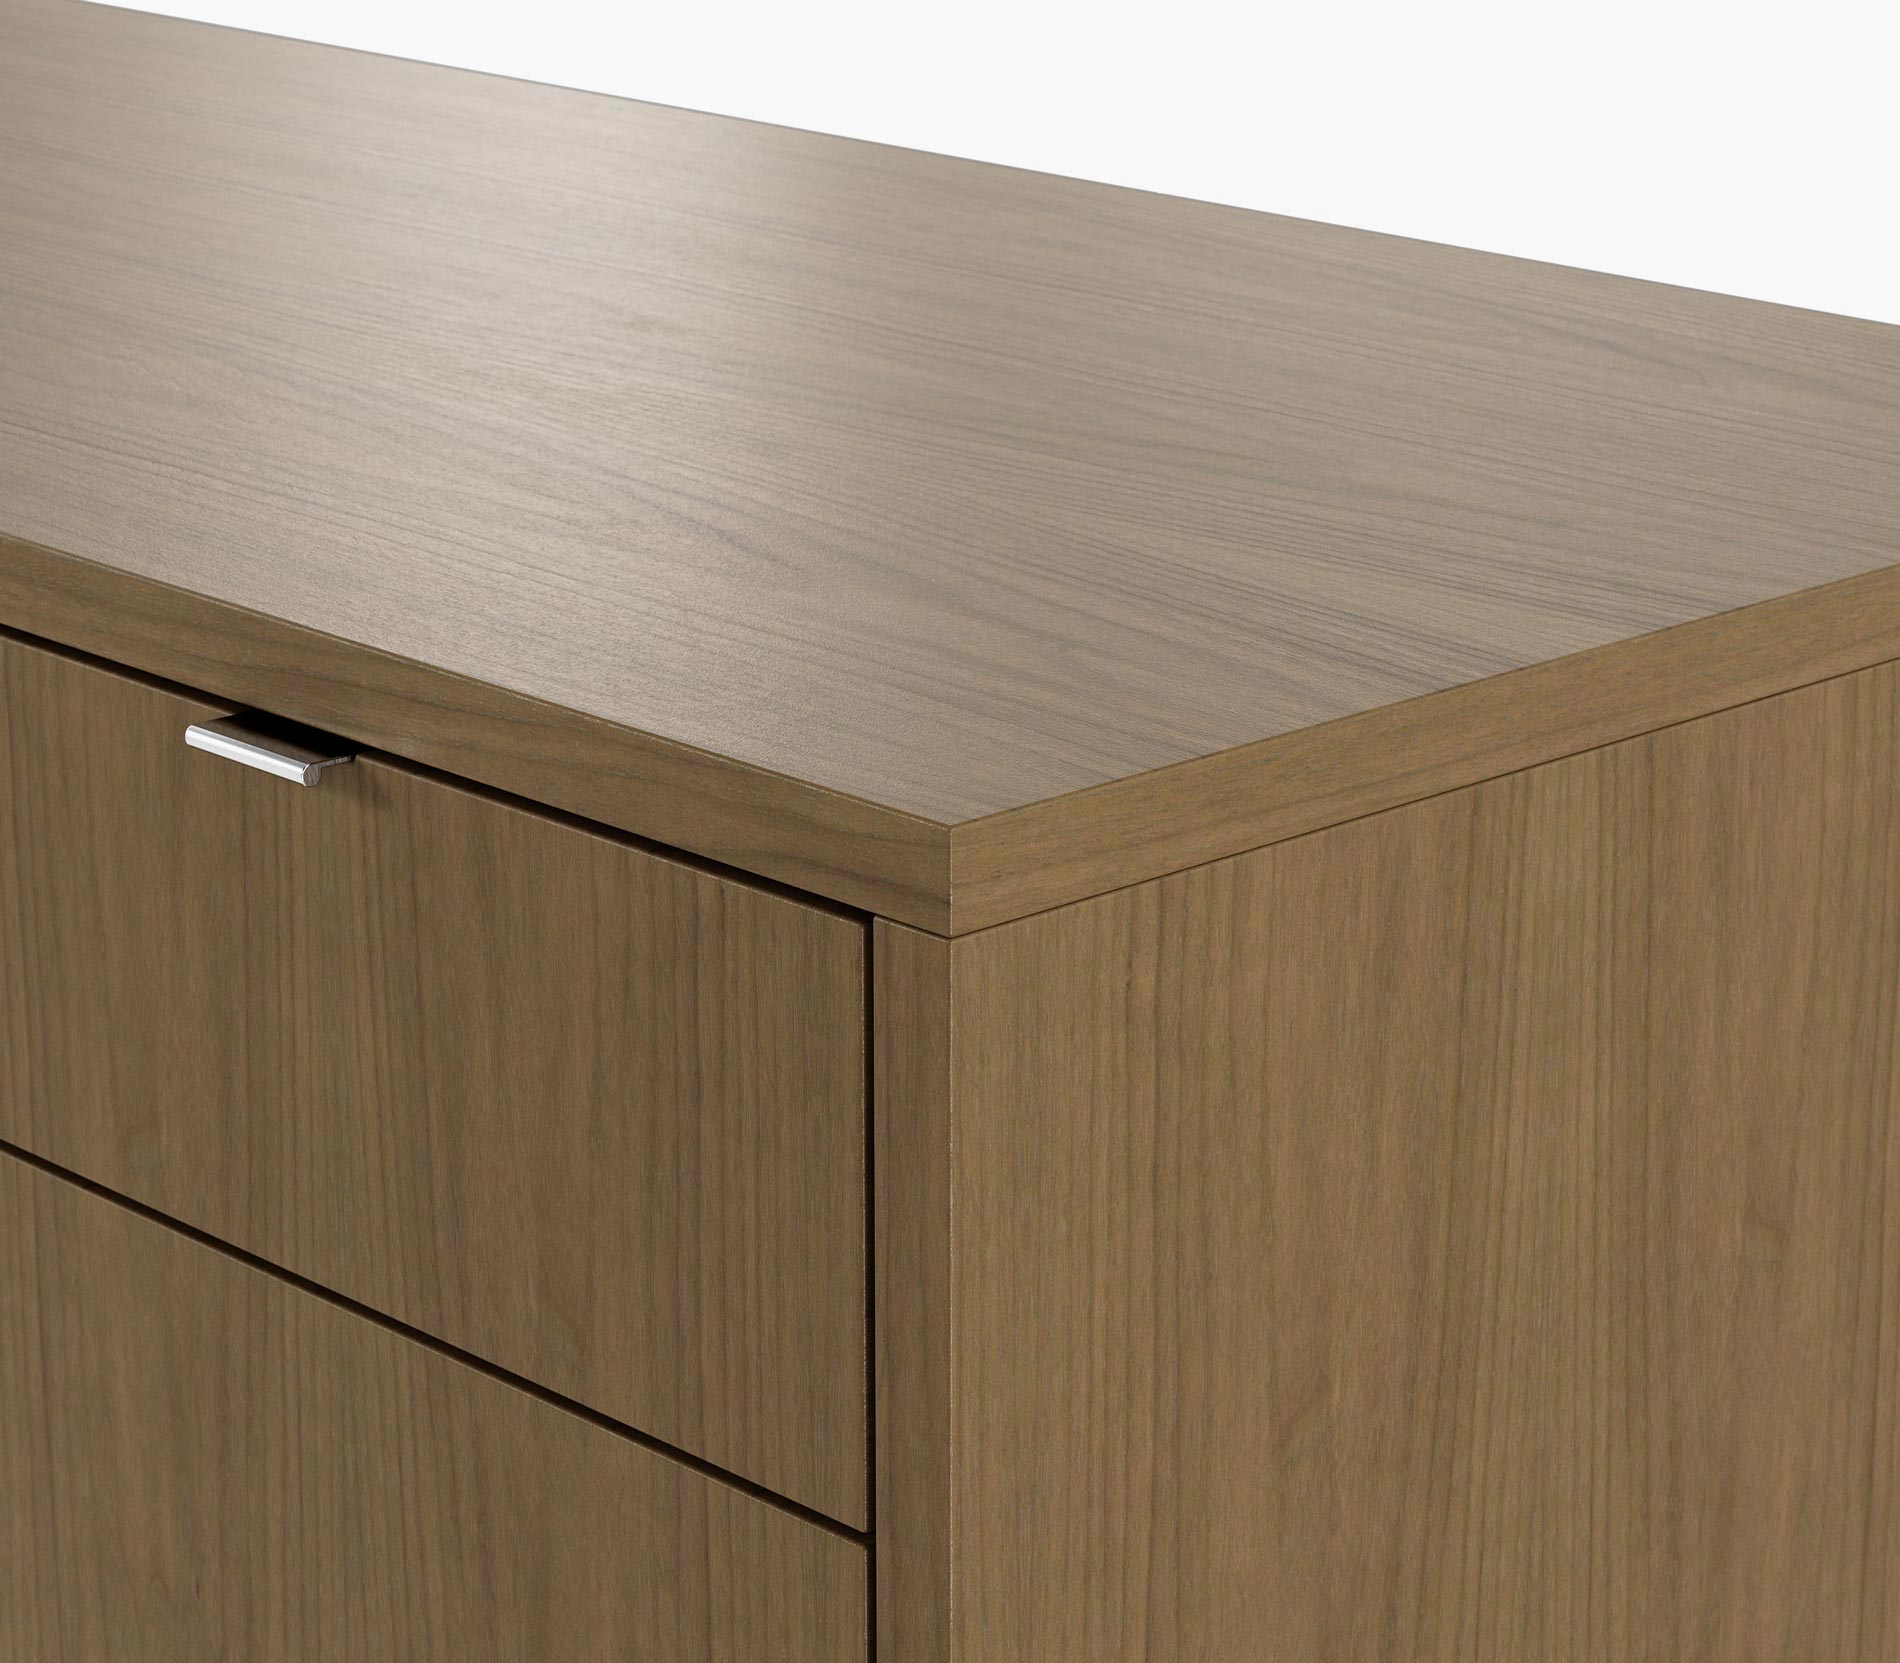 Edge detail on a Highline Twenty Five Credenza in natural flat cut walnut with  polished chrome drawer pulls